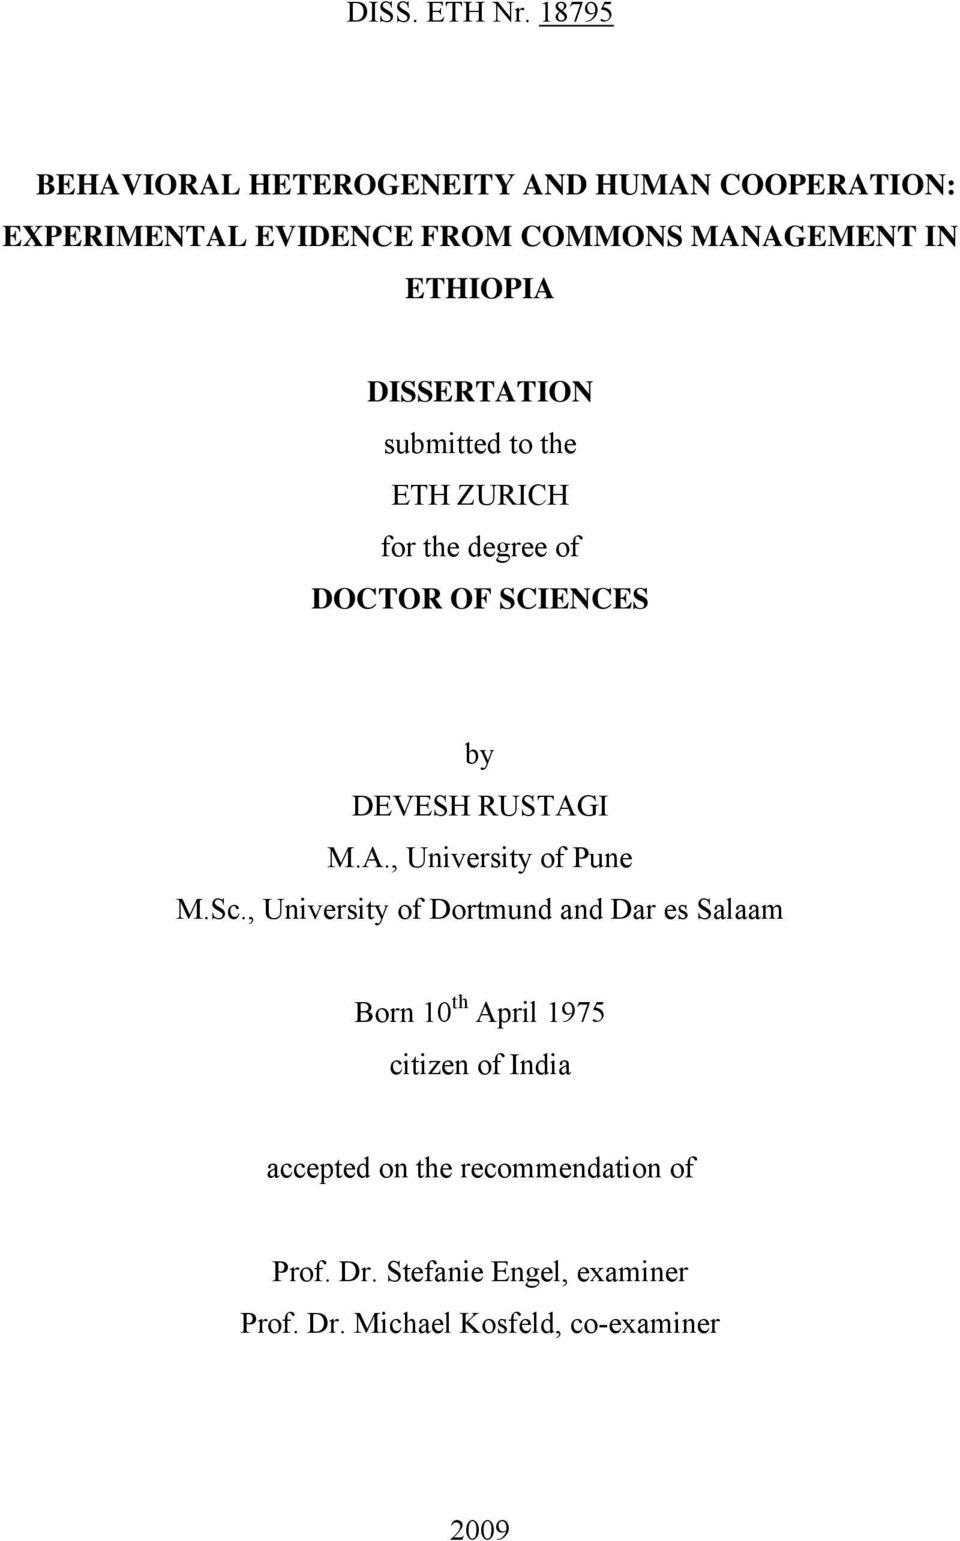 DISSERTATION submitted to the ETH ZURICH for the degree of DOCTOR OF SCIENCES by DEVESH RUSTAGI M.A., University of Pune M.